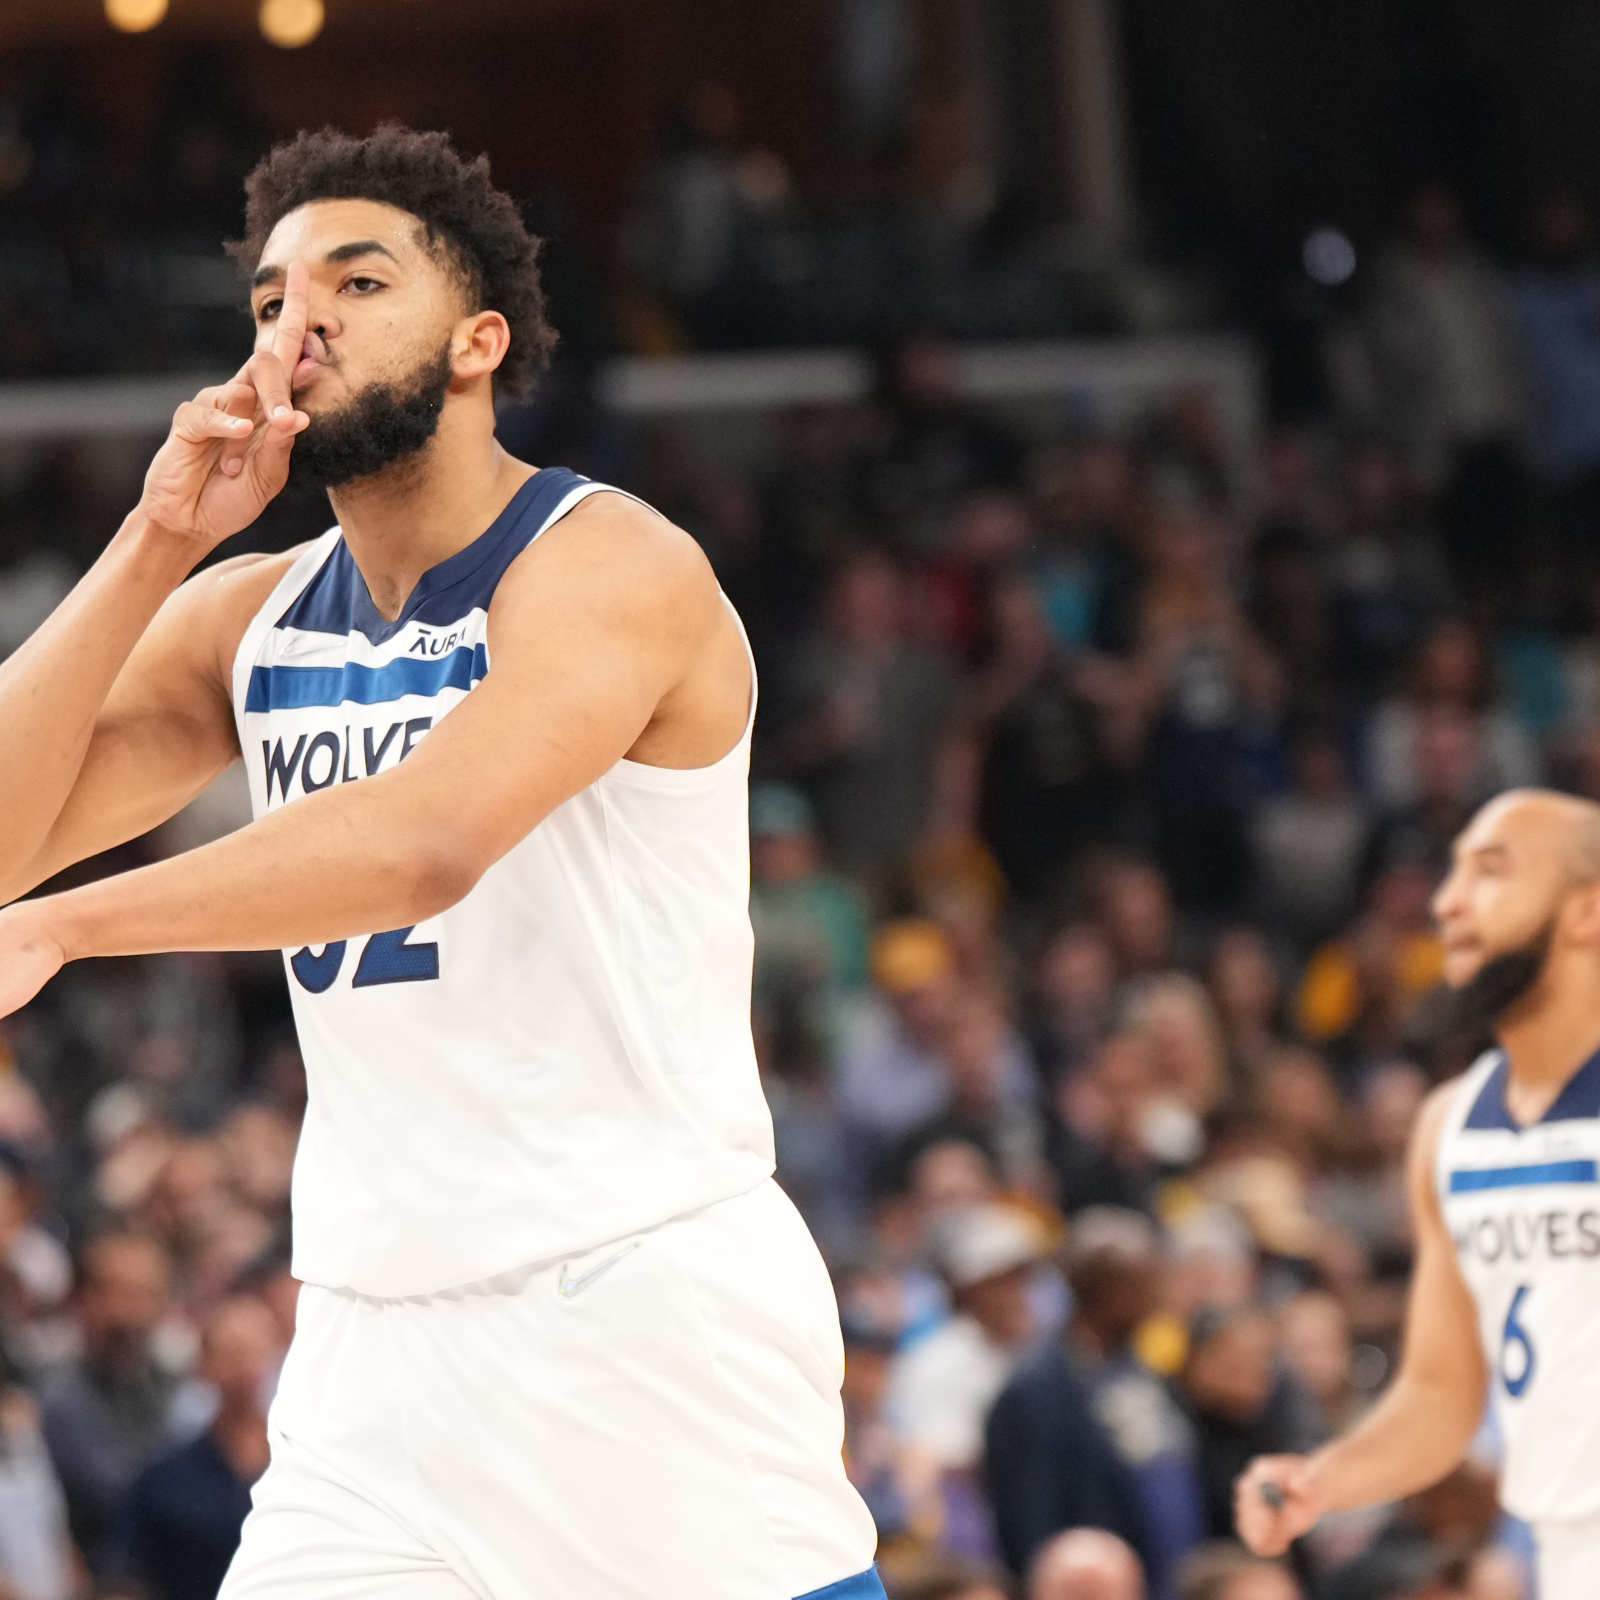 Karl-Anthony Towns denies any extra-sports team meetings